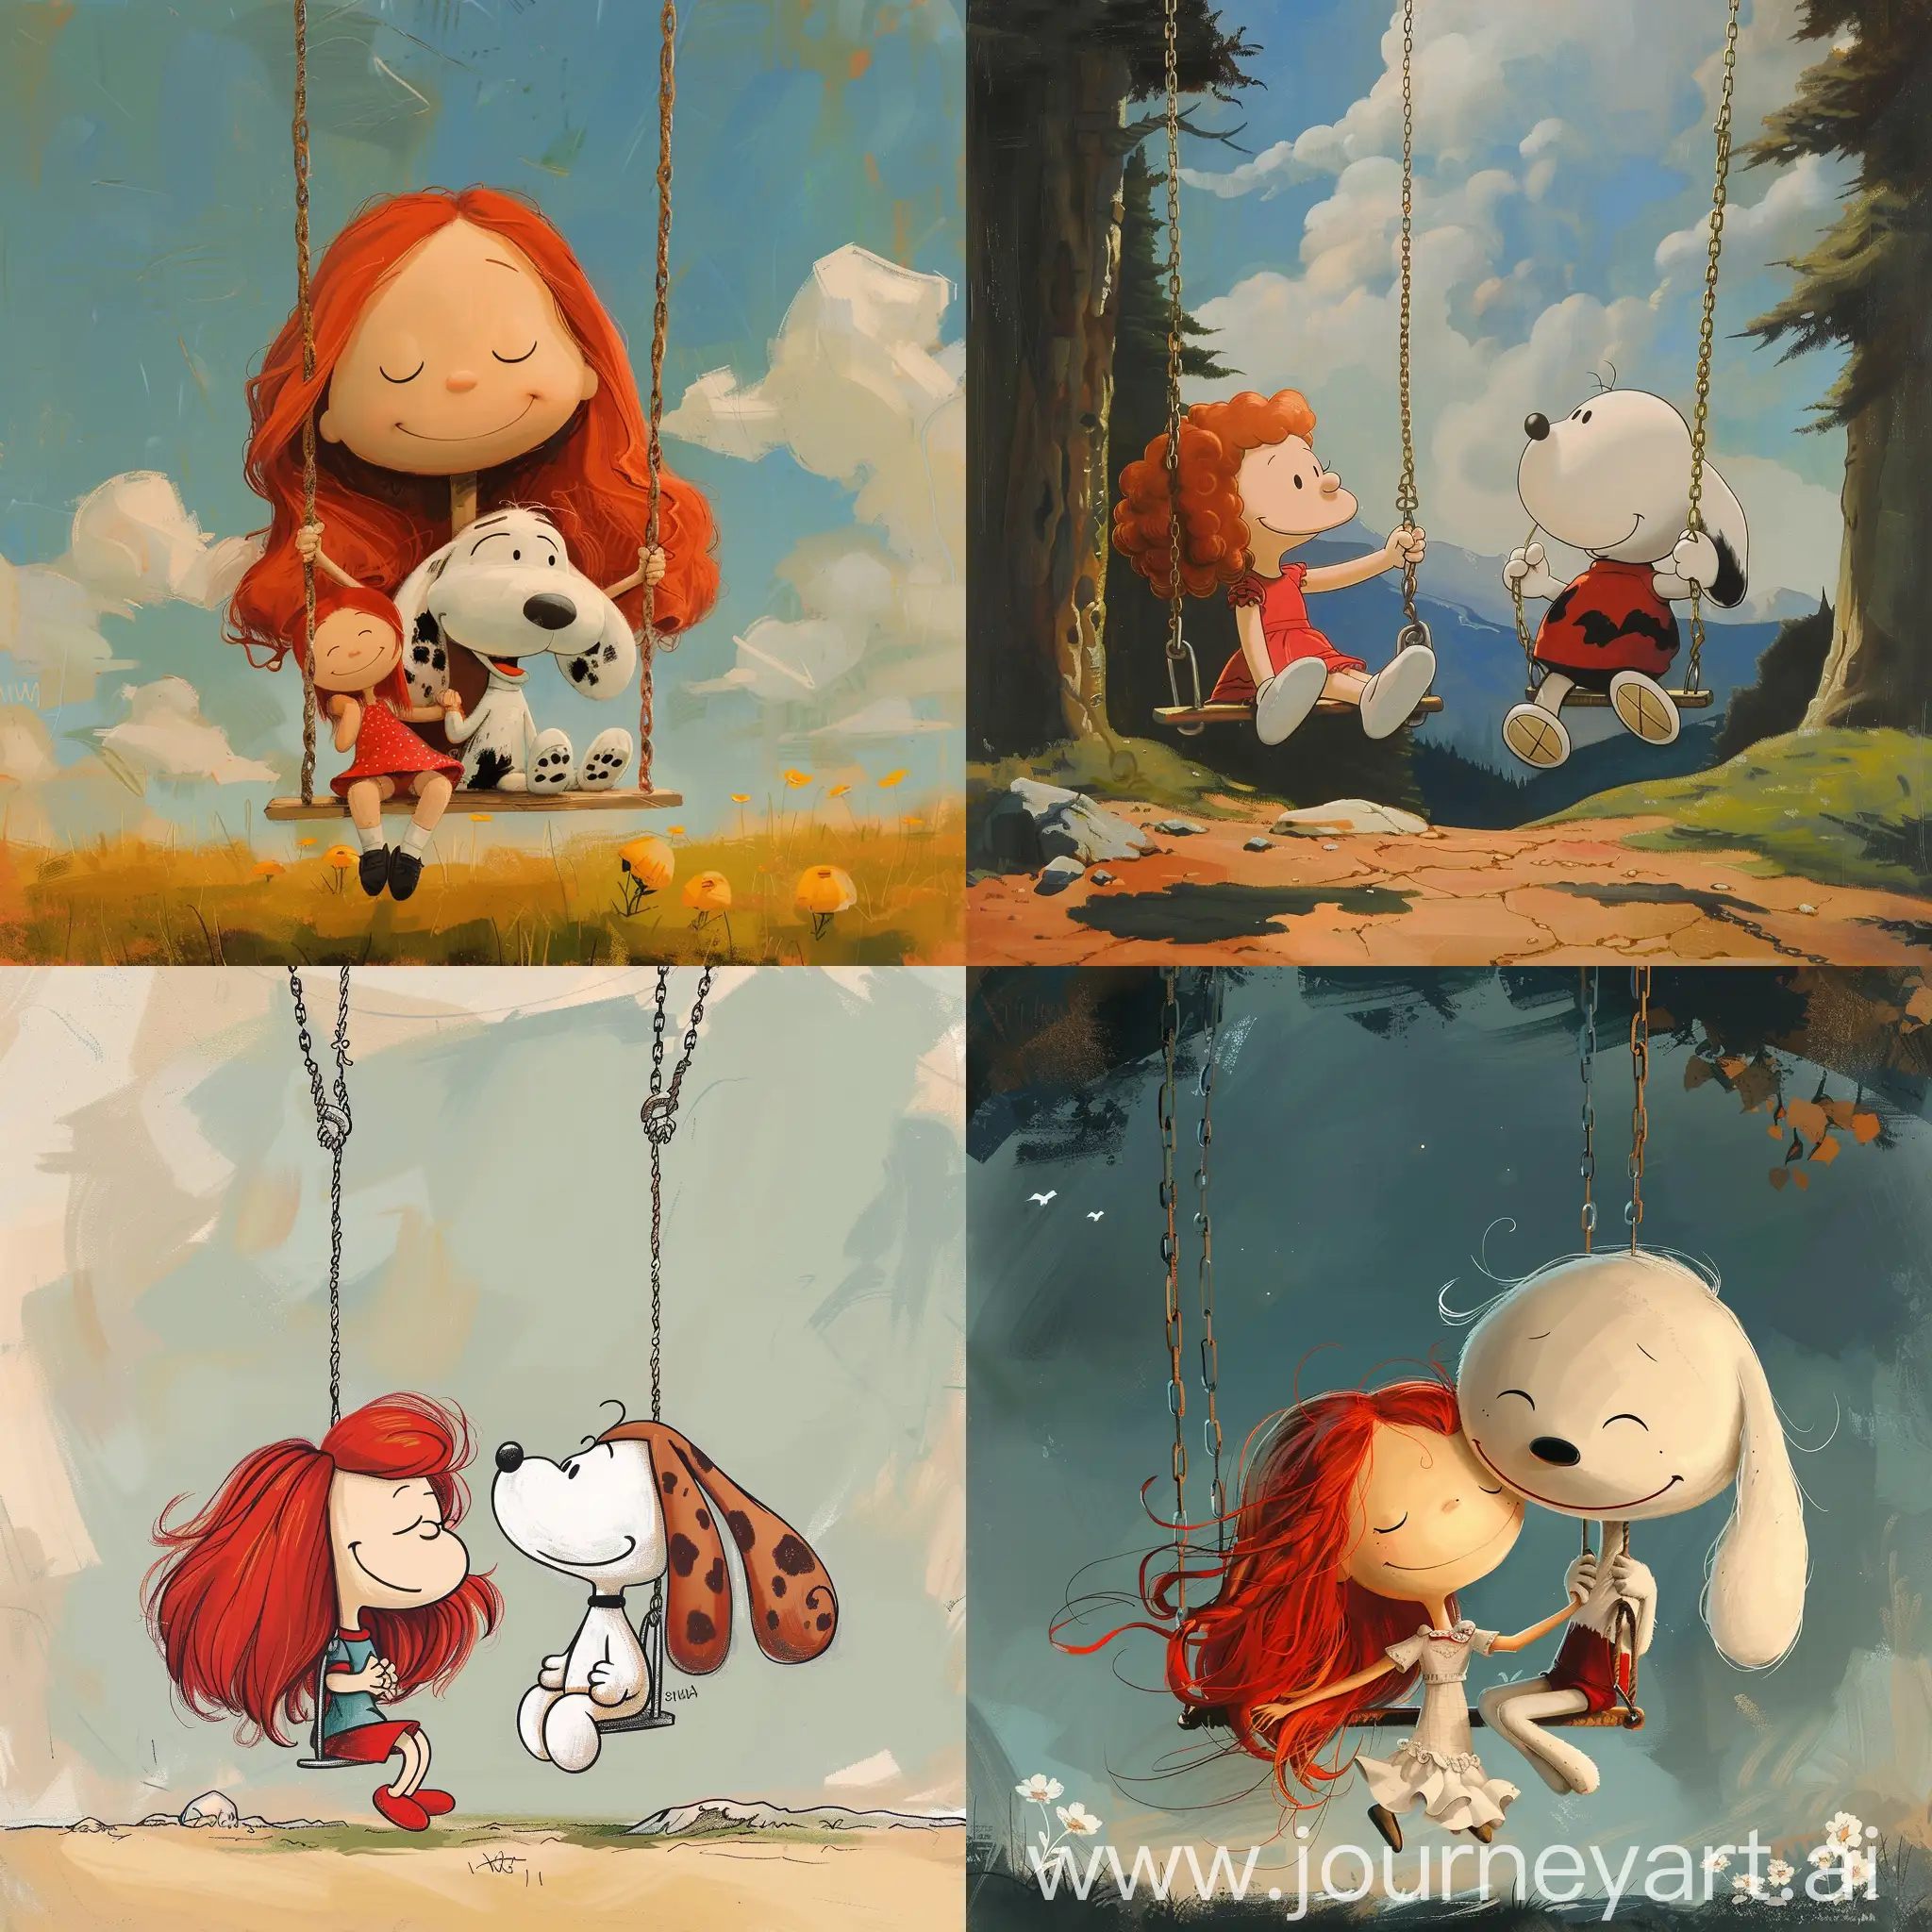 Snoopy-and-RedHaired-Girl-Swinging-in-Delightful-Harmony